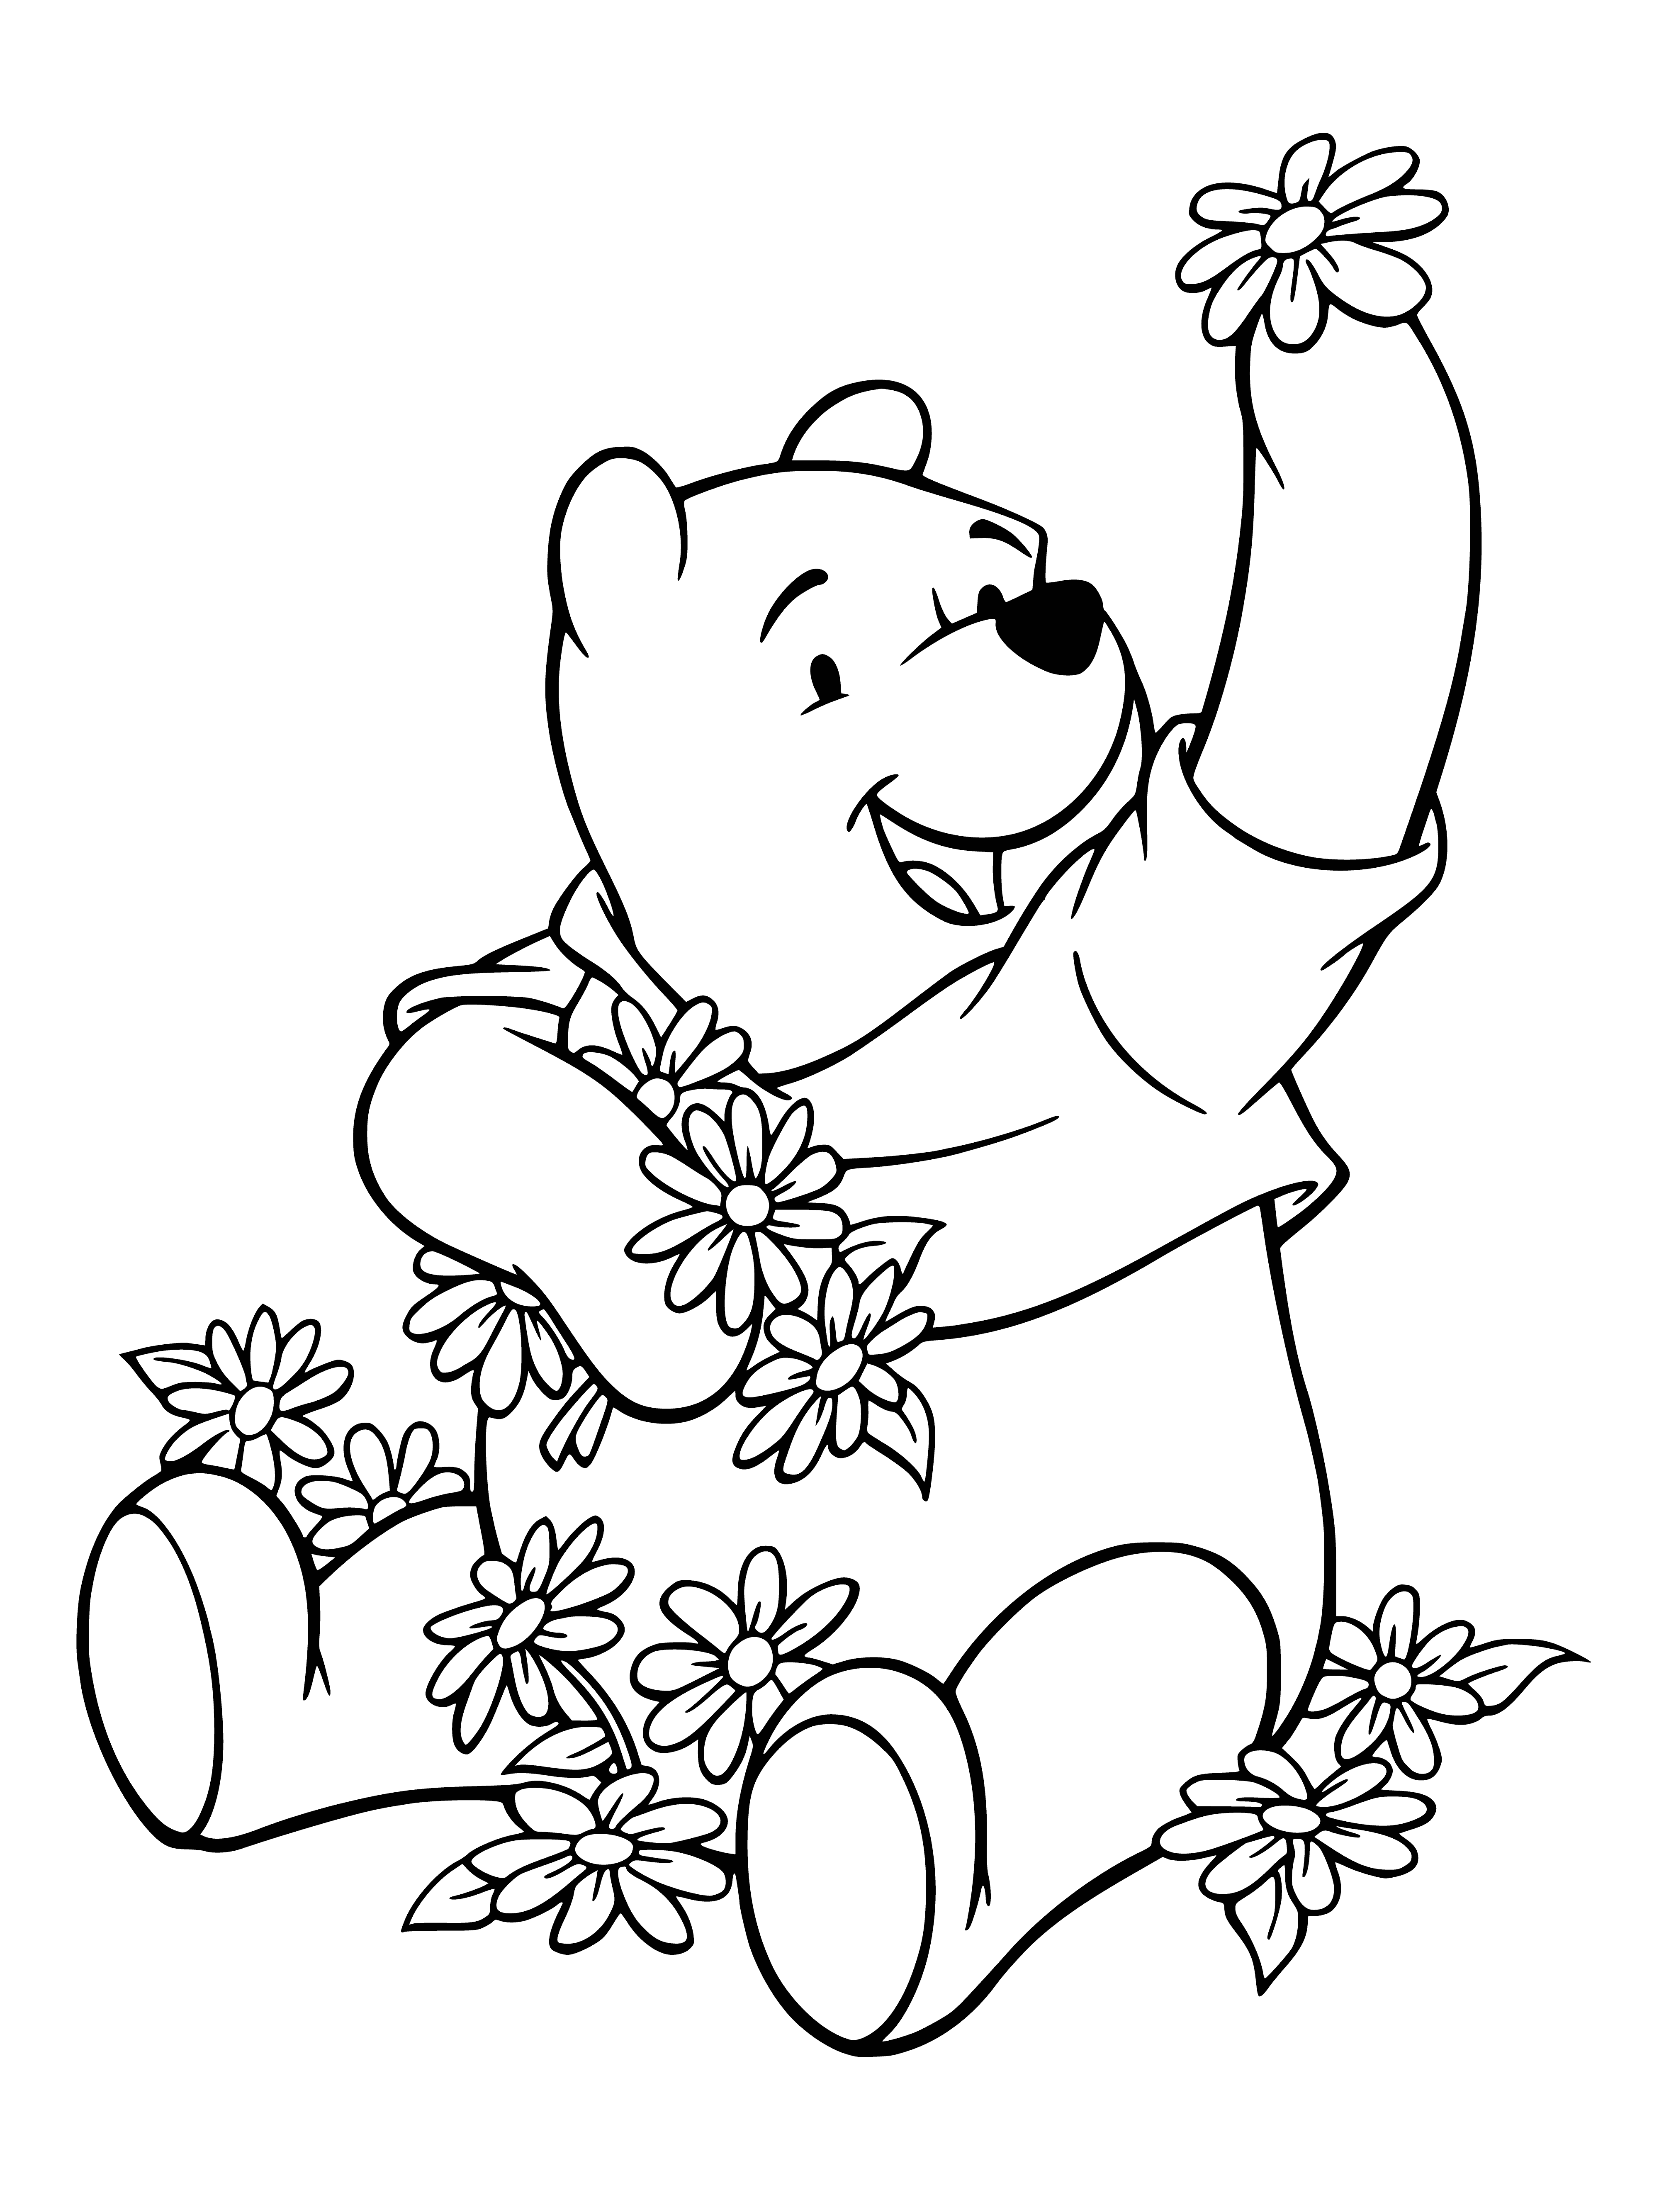 Teddy bear and flowers coloring page